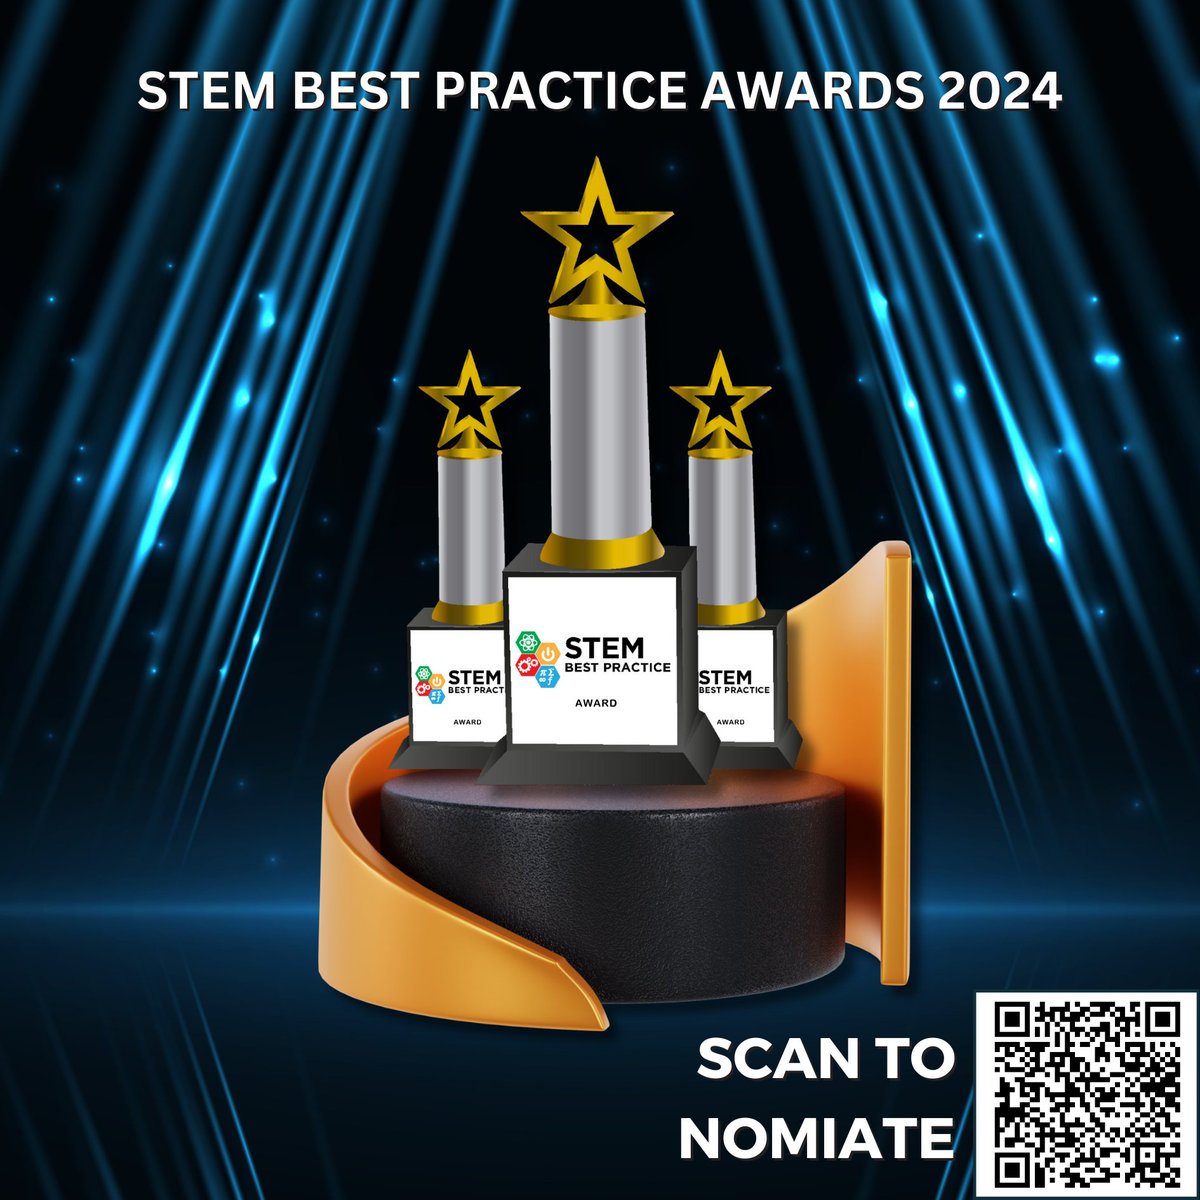 Elevate excellence in STEM education with the STEM Best Practice Awards! 🏆 

Nominate now: docs.google.com/forms/d/e/1FAI…

#STEM #STEMeducation #innovation #learning #technology #science #engineering #edtech #STEMcareers #STEMawards #STEMworkshops #InnovationExhibition #STEMExhibition